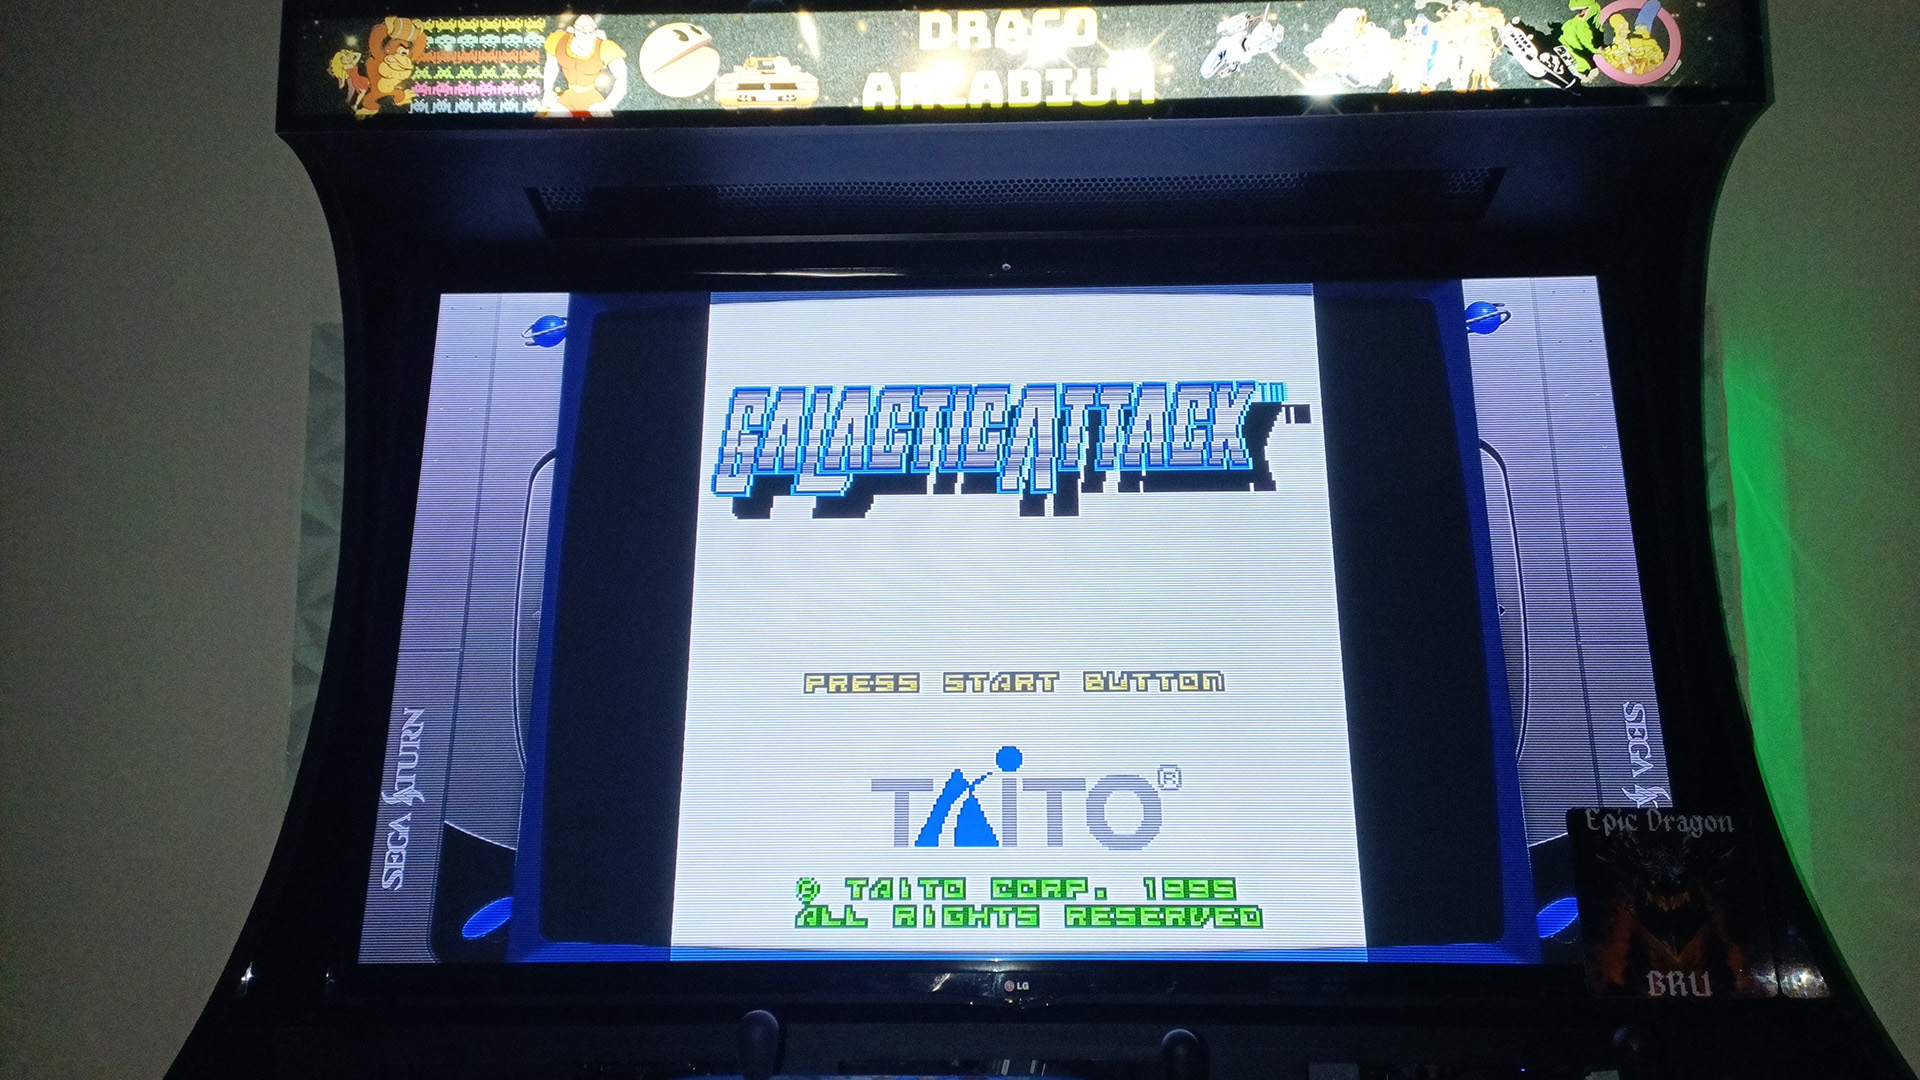 EpicDragon: Galactic Attack: Hard 3 (Sega Saturn Emulated) 523,300 points on 2022-08-14 14:49:47